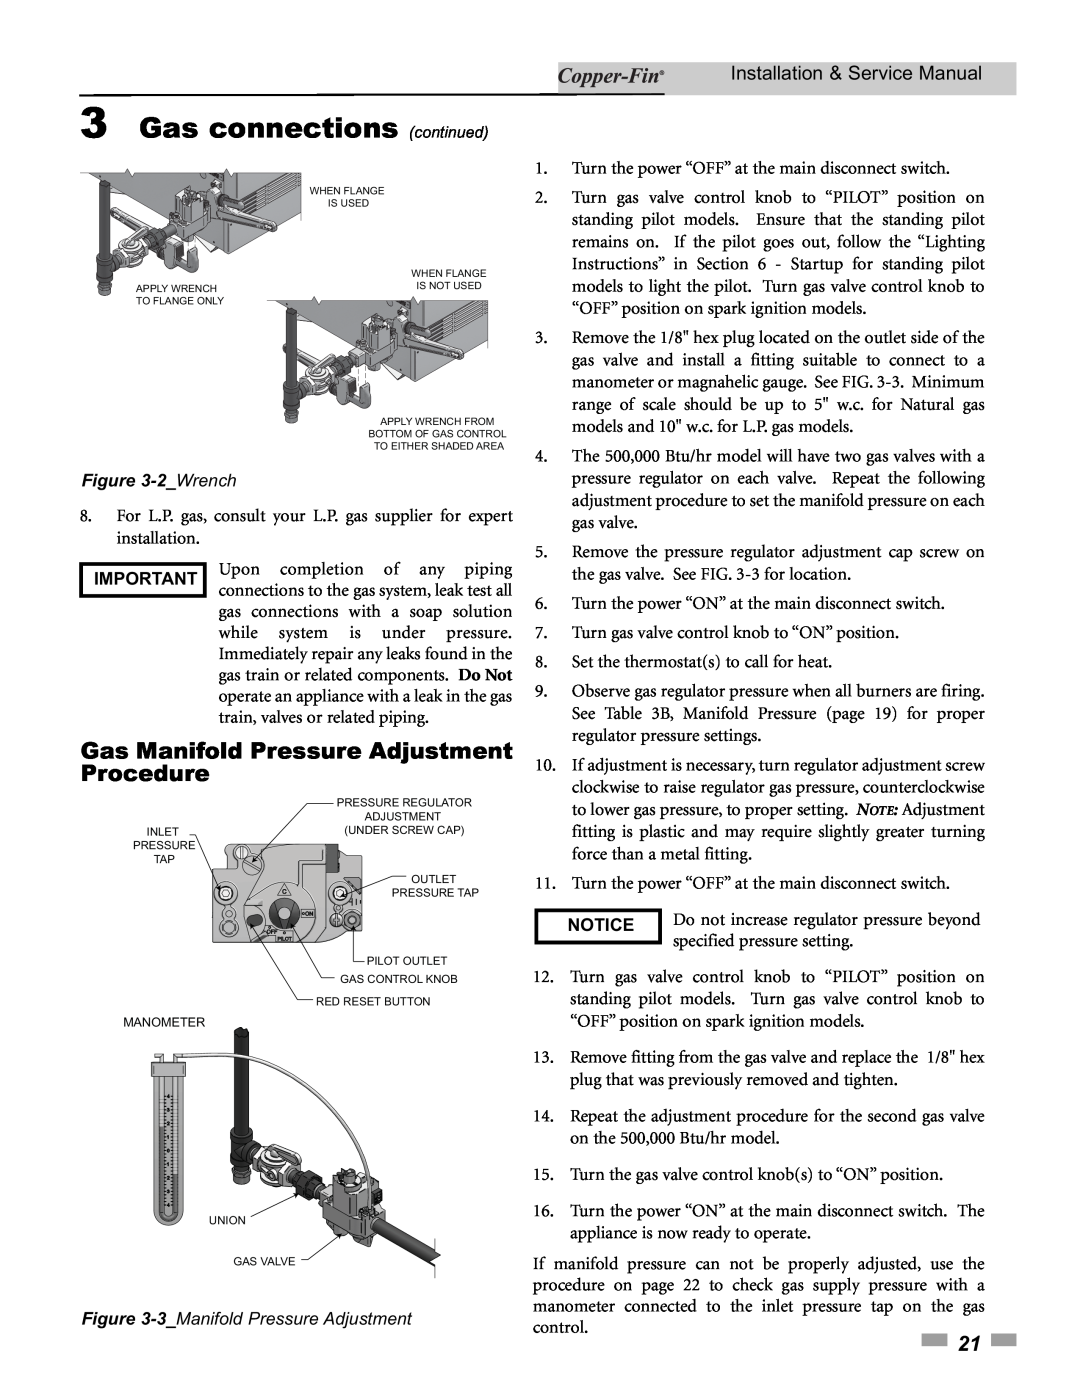 Lochinvar 90, 500 service manual 3Gas connections continued, Gas Manifold Pressure Adjustment Procedure, 2_Wrench, Notice 